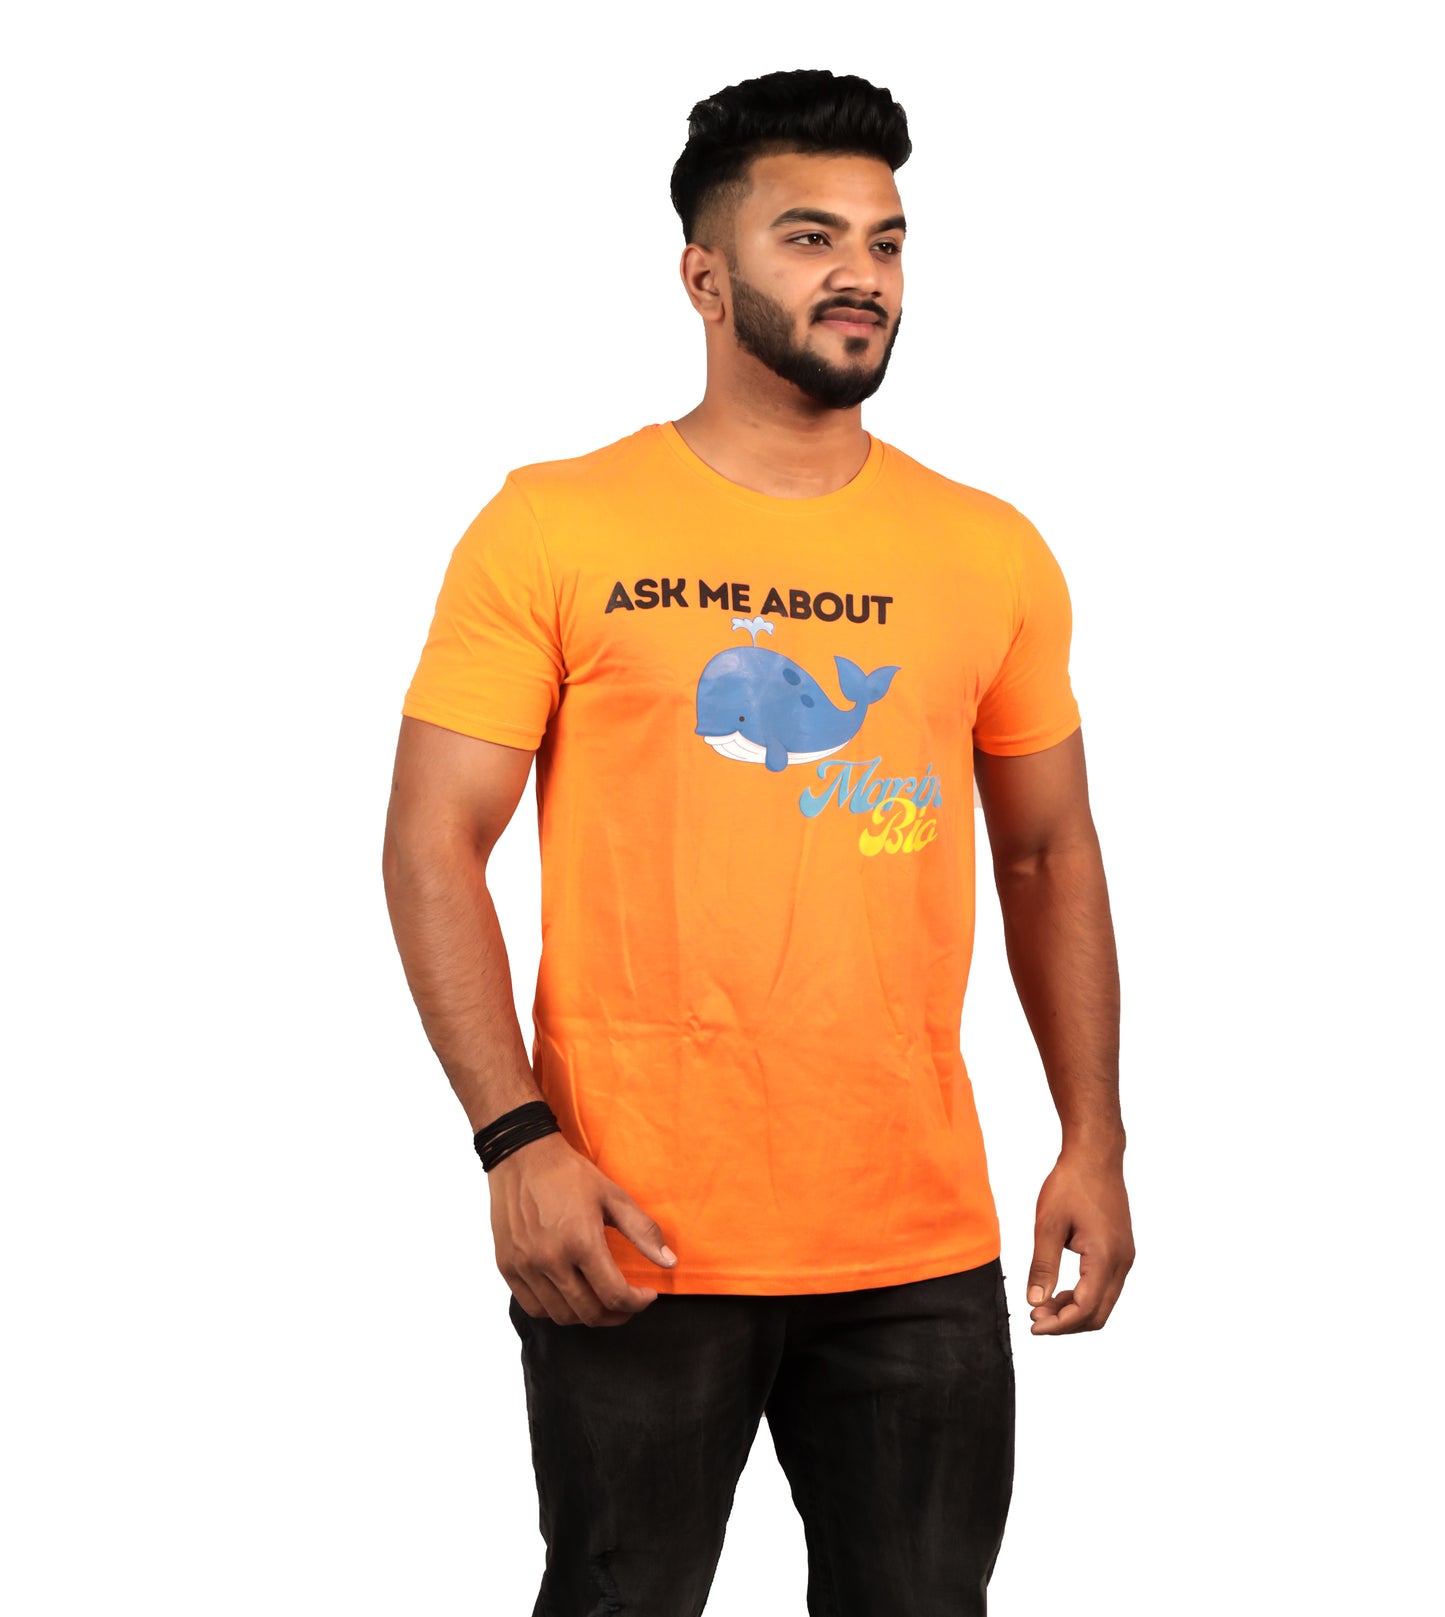 Ask me About Marine Bio T-Shirt In Orange Color For Men